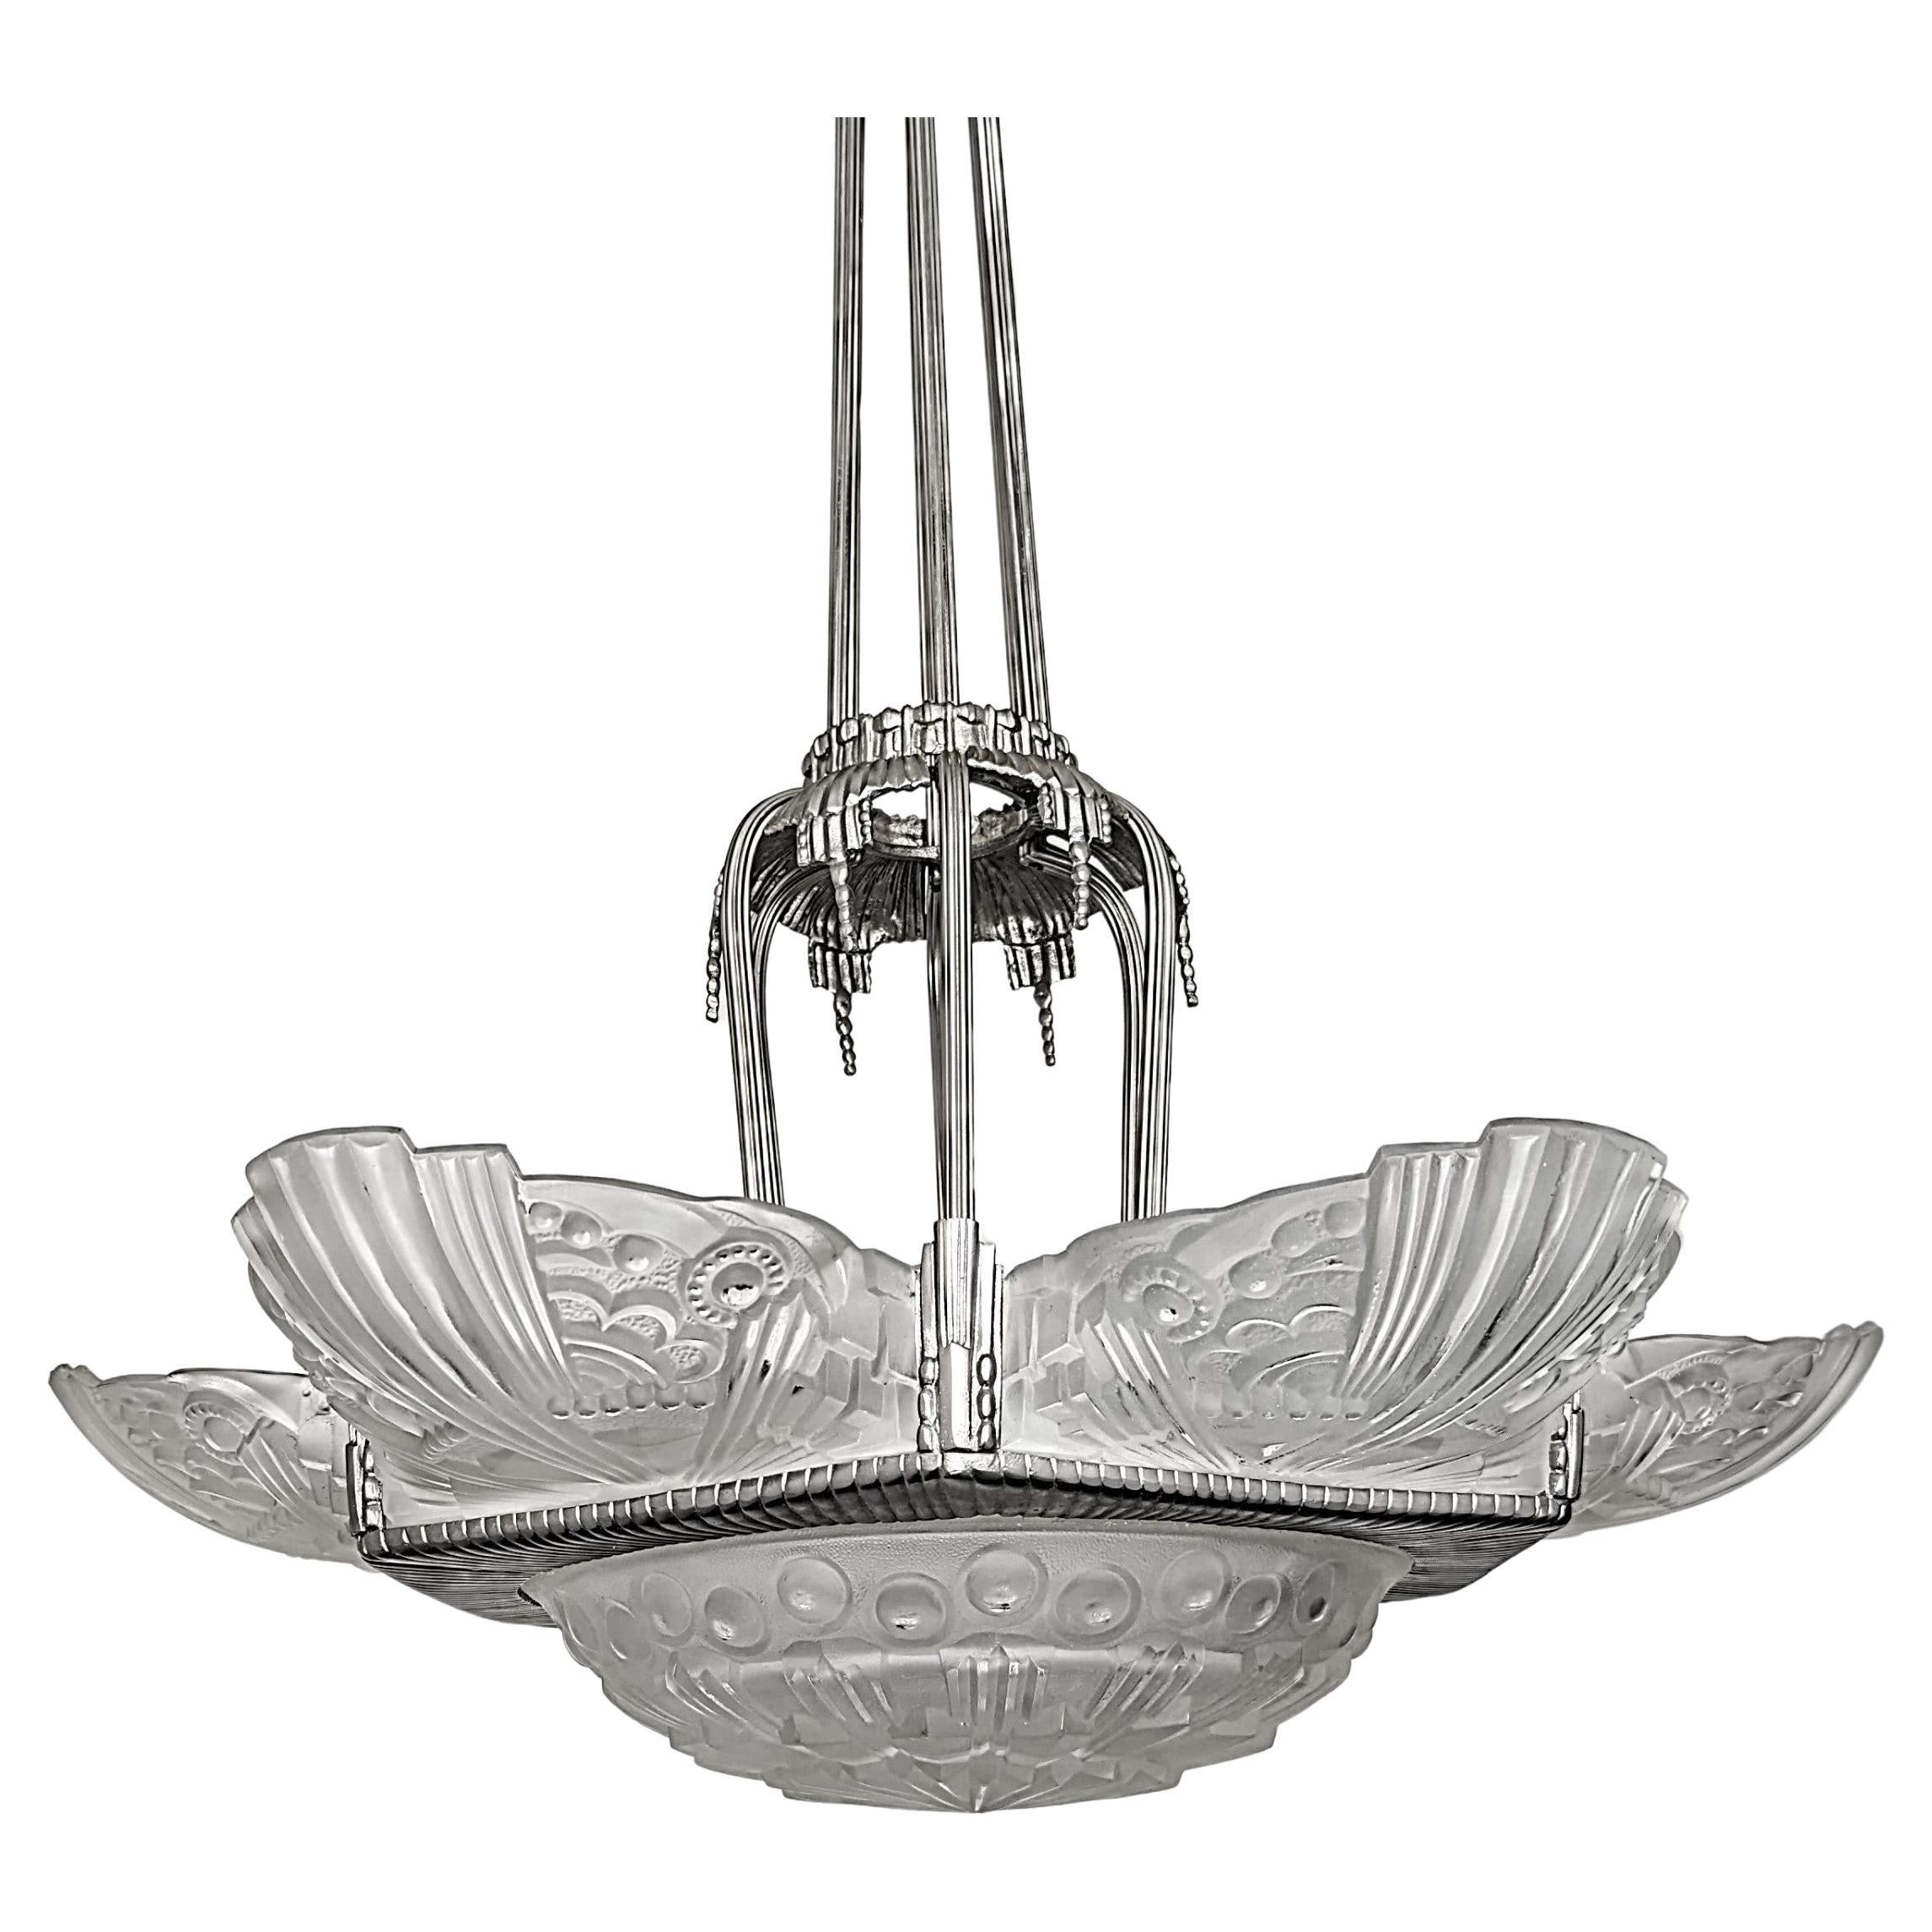 This spectacular French Art Deco chandelier was designed by the master 